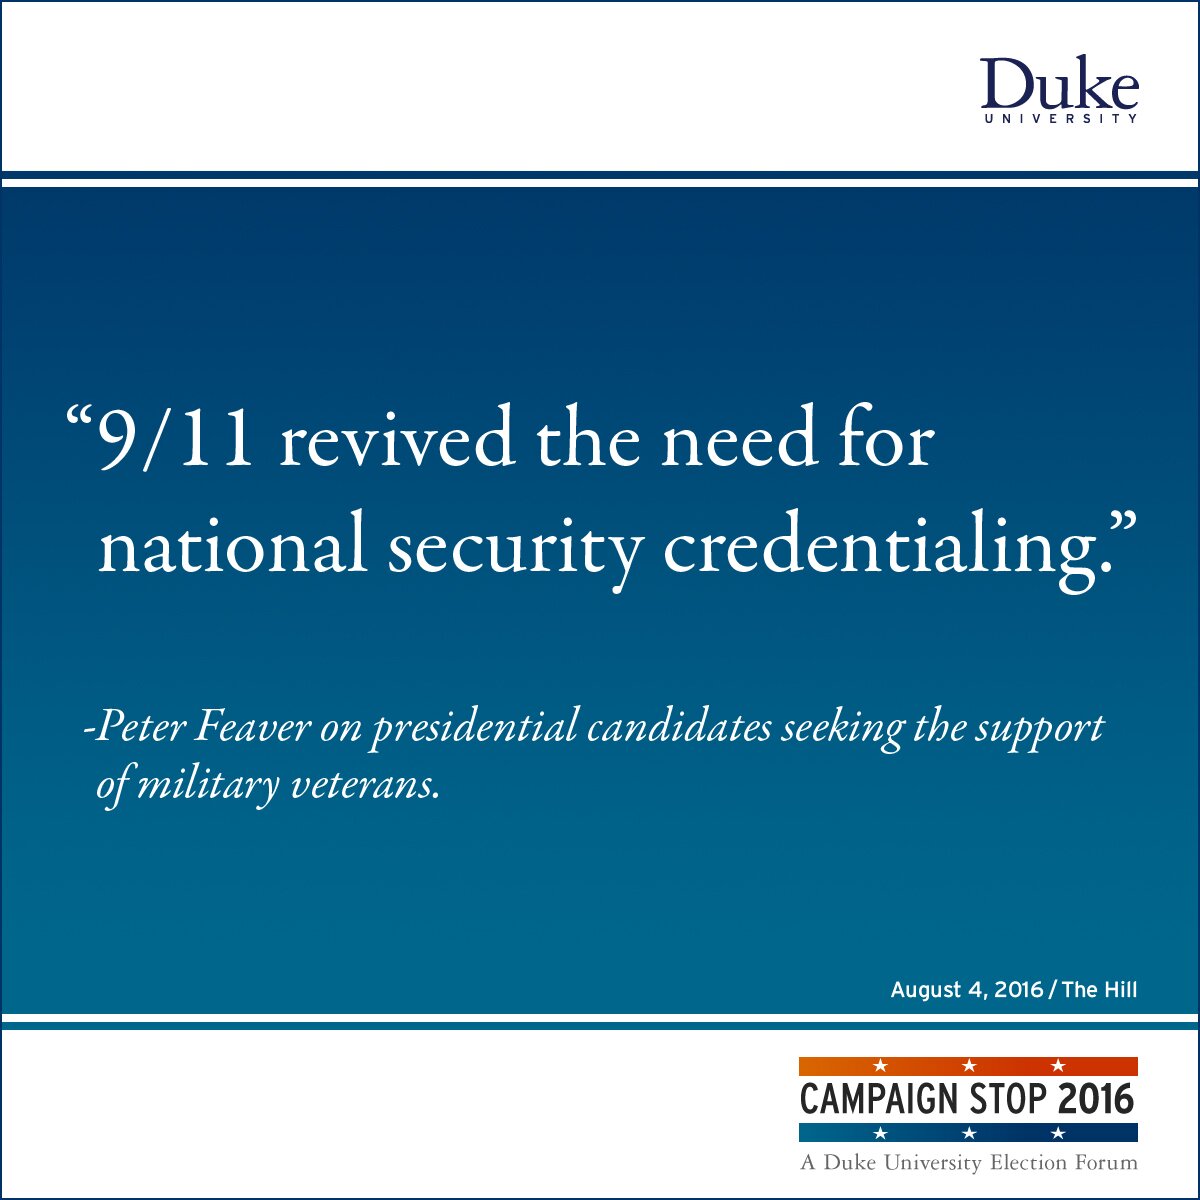 “9/11 revived the need for national security credentialing.” -Peter Feaver on presidential candidates seeking the support of military veterans.